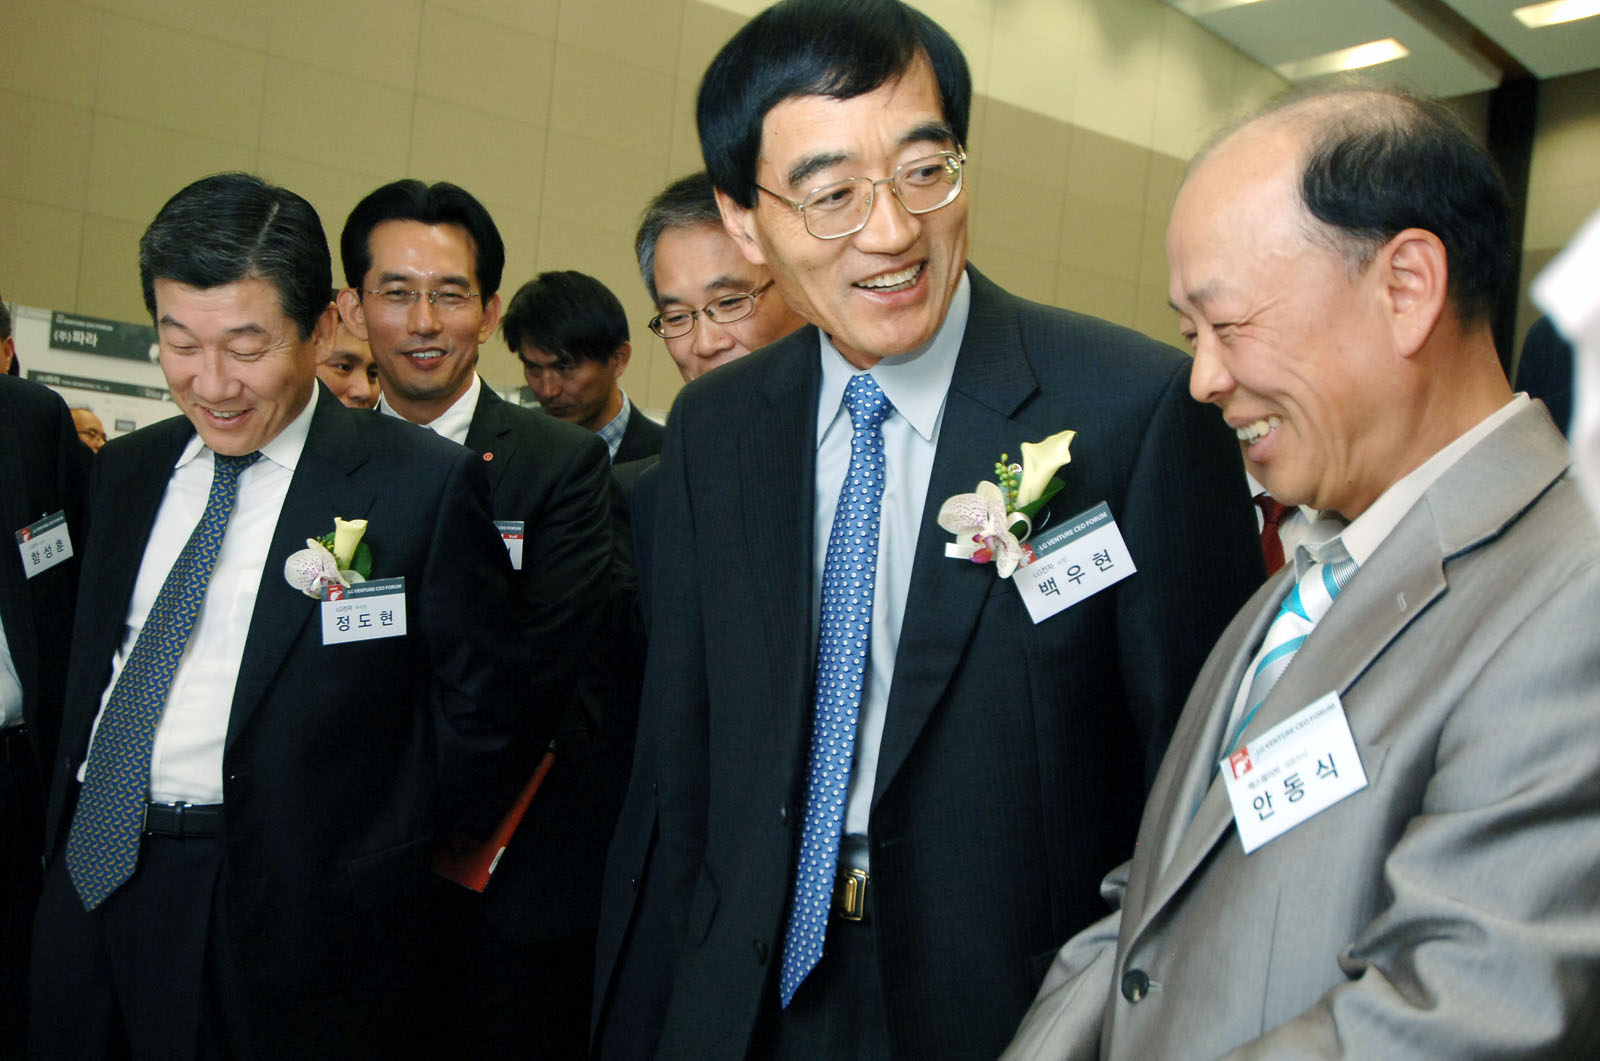 many men smiling and laughing together in formal wear